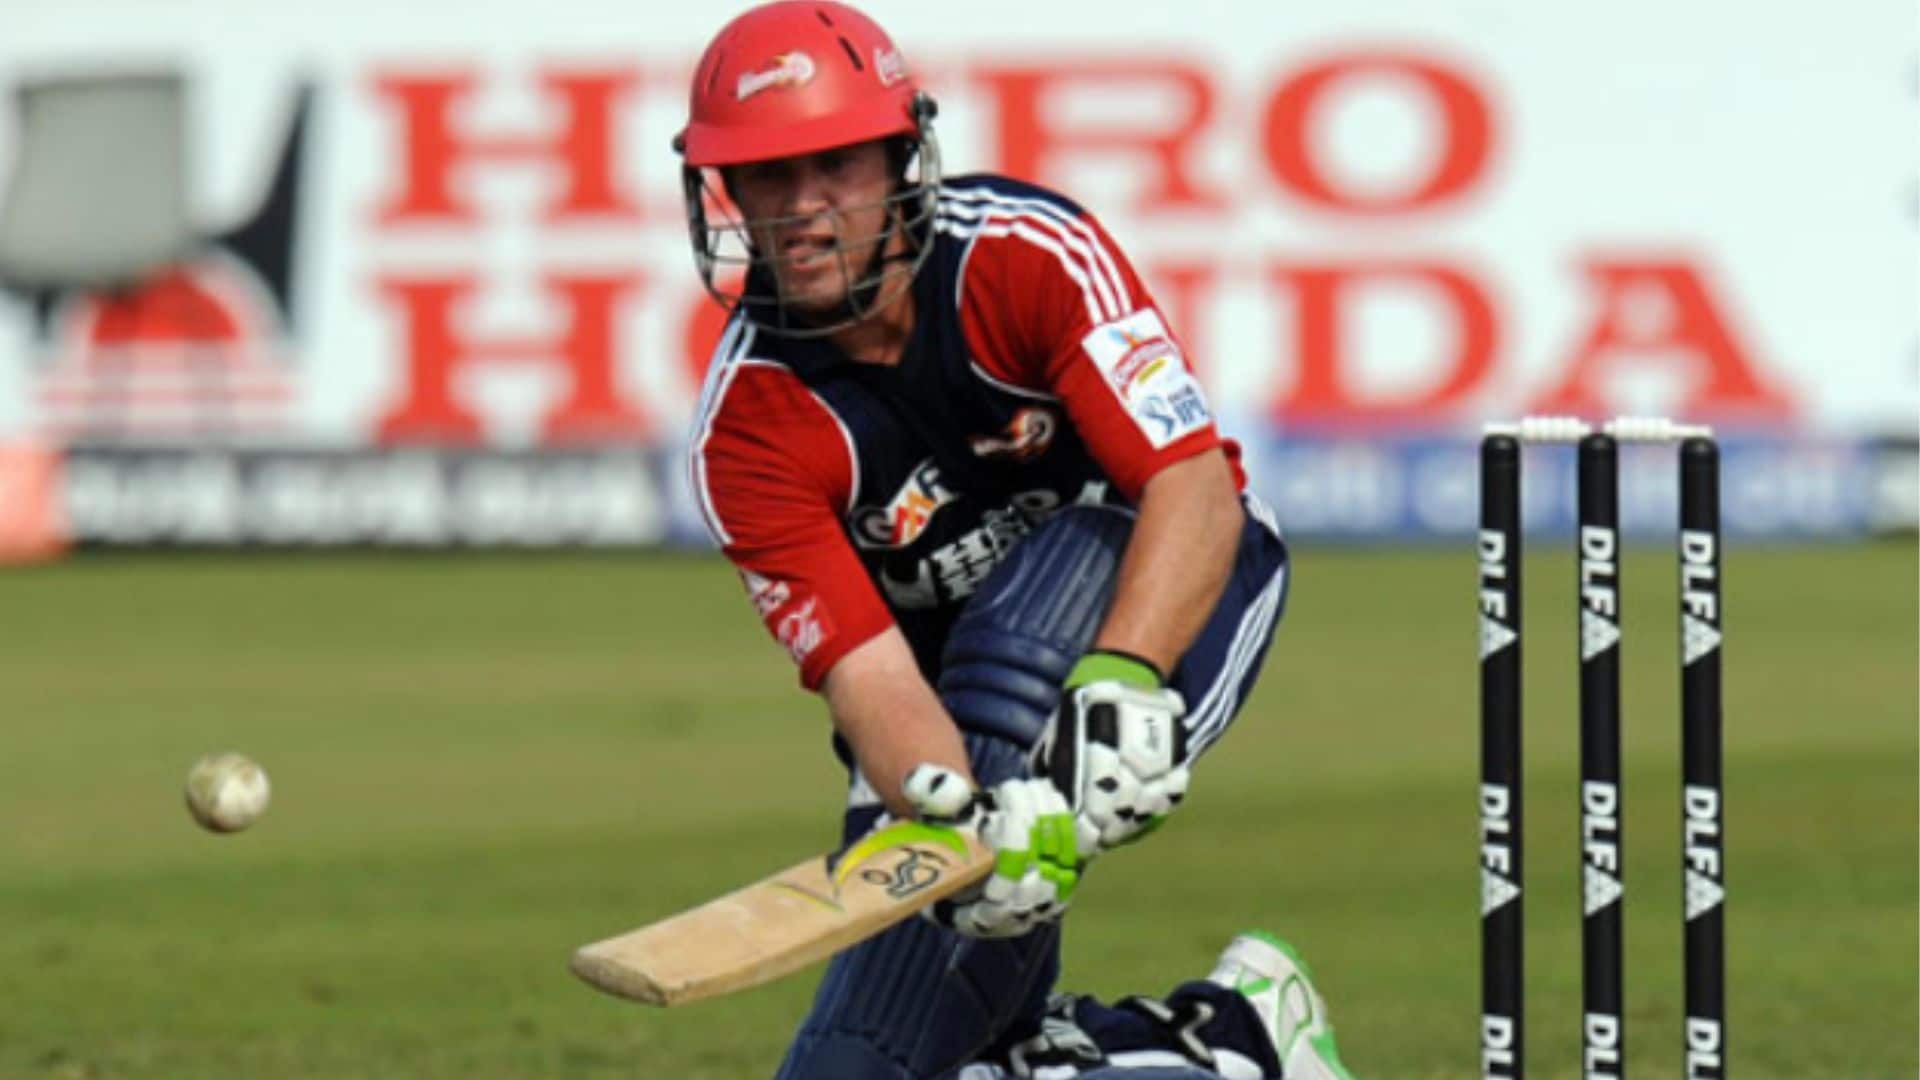 When AB de Villiers Revealed He Was 'Kicked Out' Of Delhi In IPL 2010